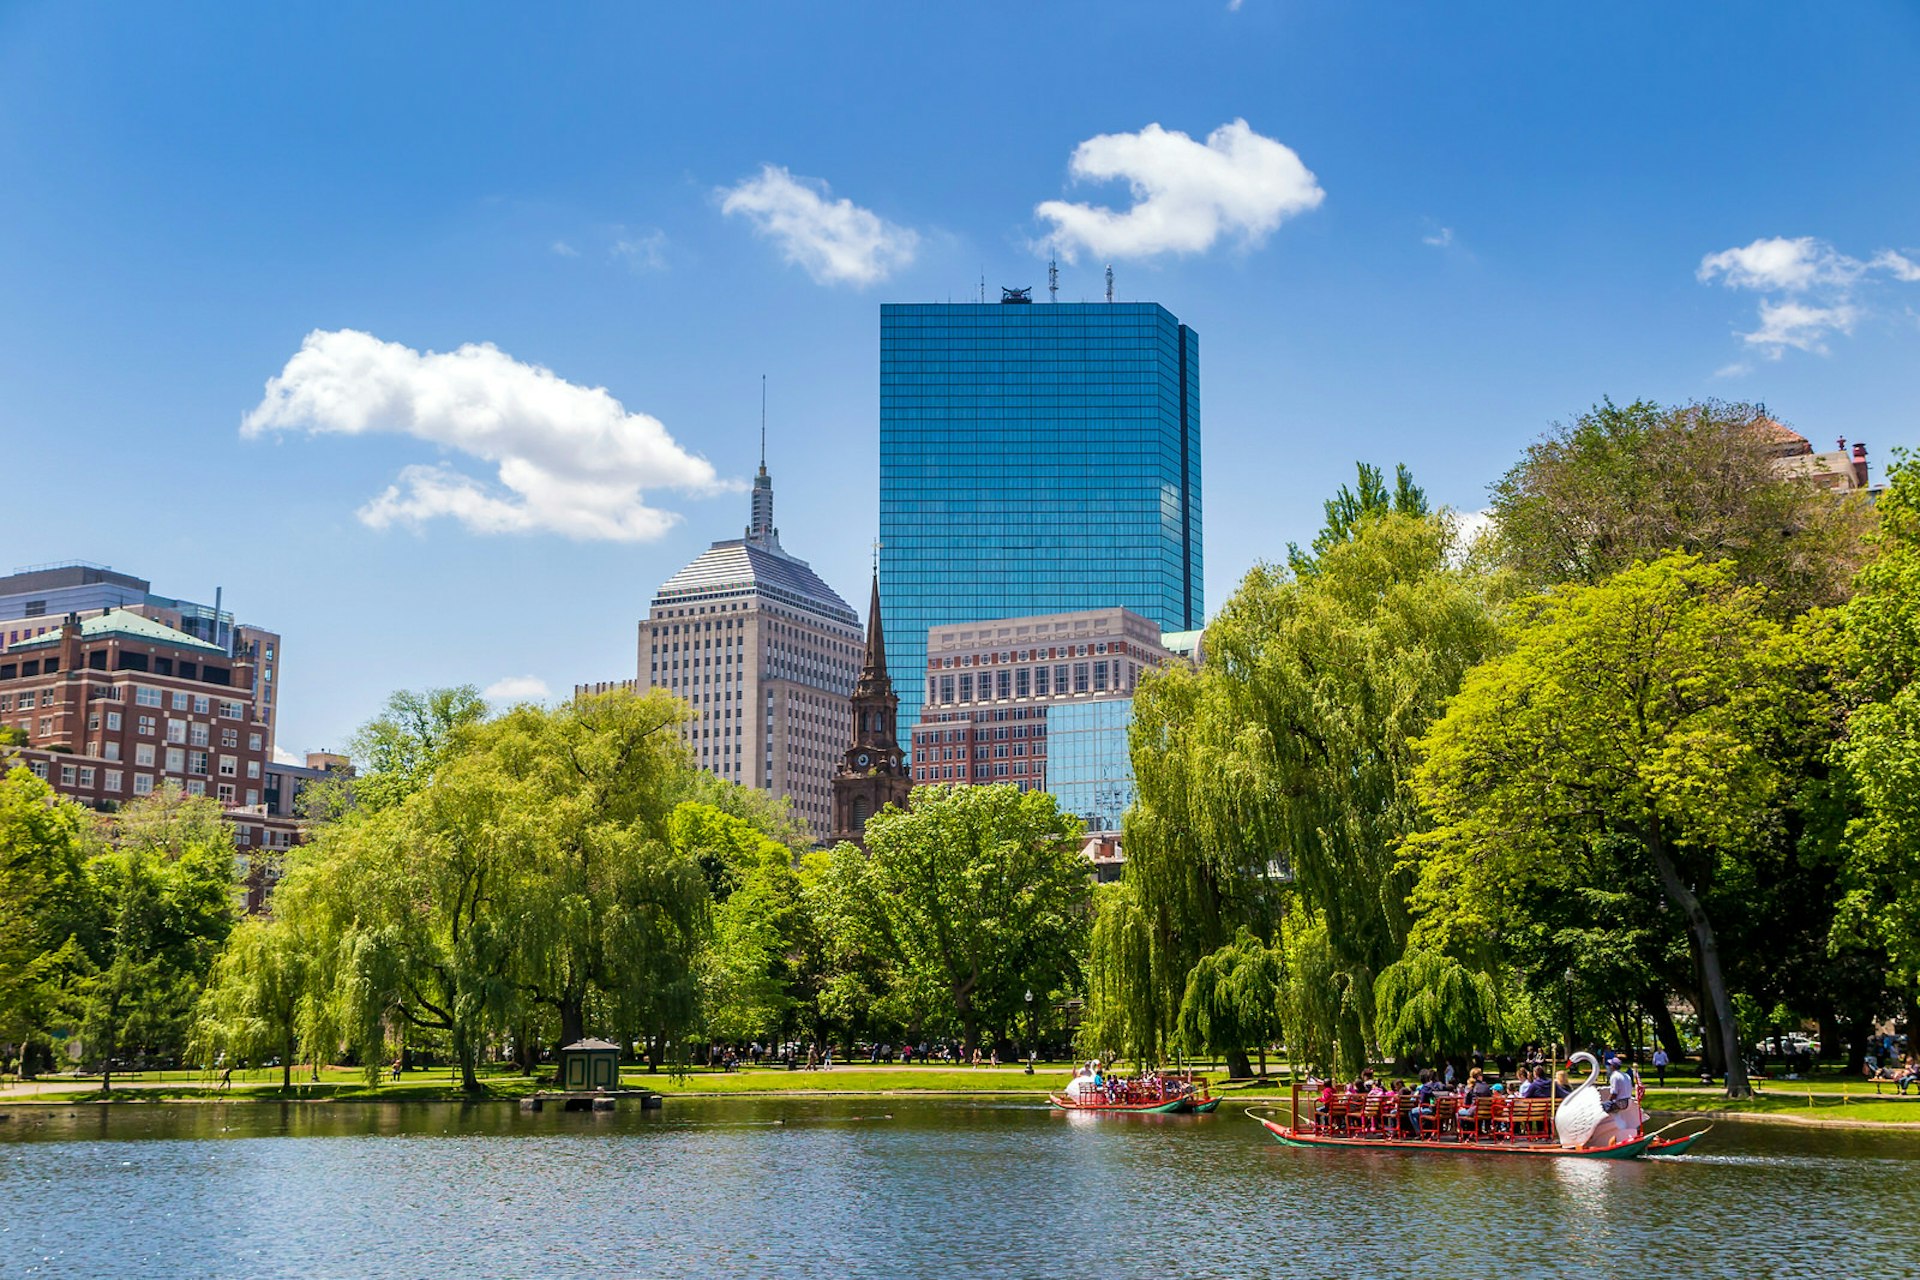 Visitors riding the swan boats at the Boston Public Garden on a sunny summer day; in the background, behind the tree-lined waterway are a couple of glass skyscrapers poking up into a blue sky dotted with a few whispy white clouds; baby travel